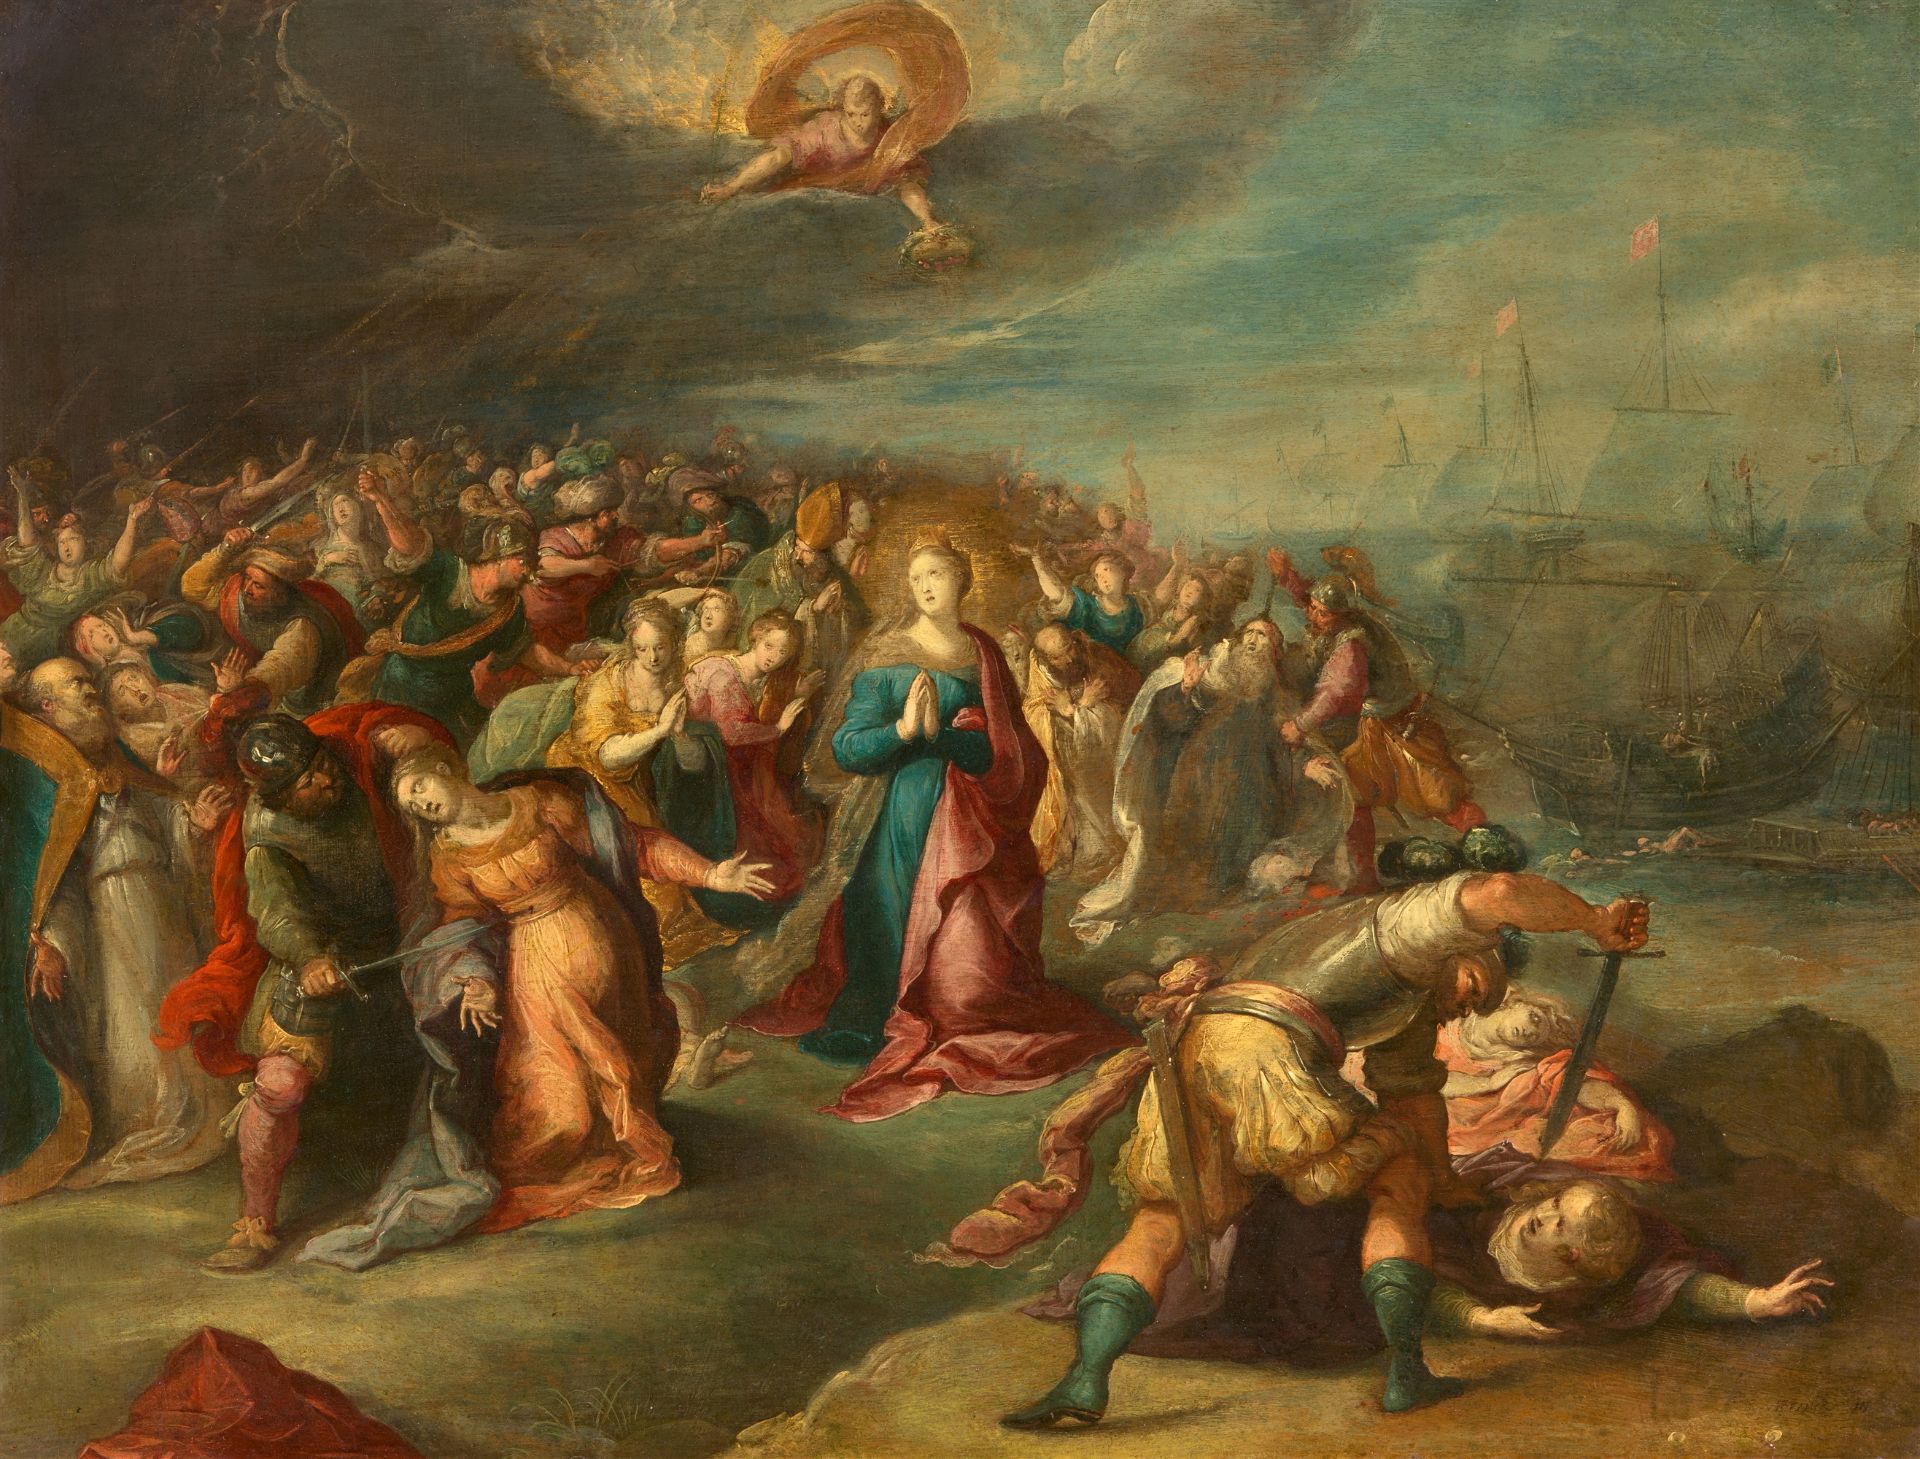 Frans Francken the Younger, attributed to, The Martyrdom of Saint Ursula